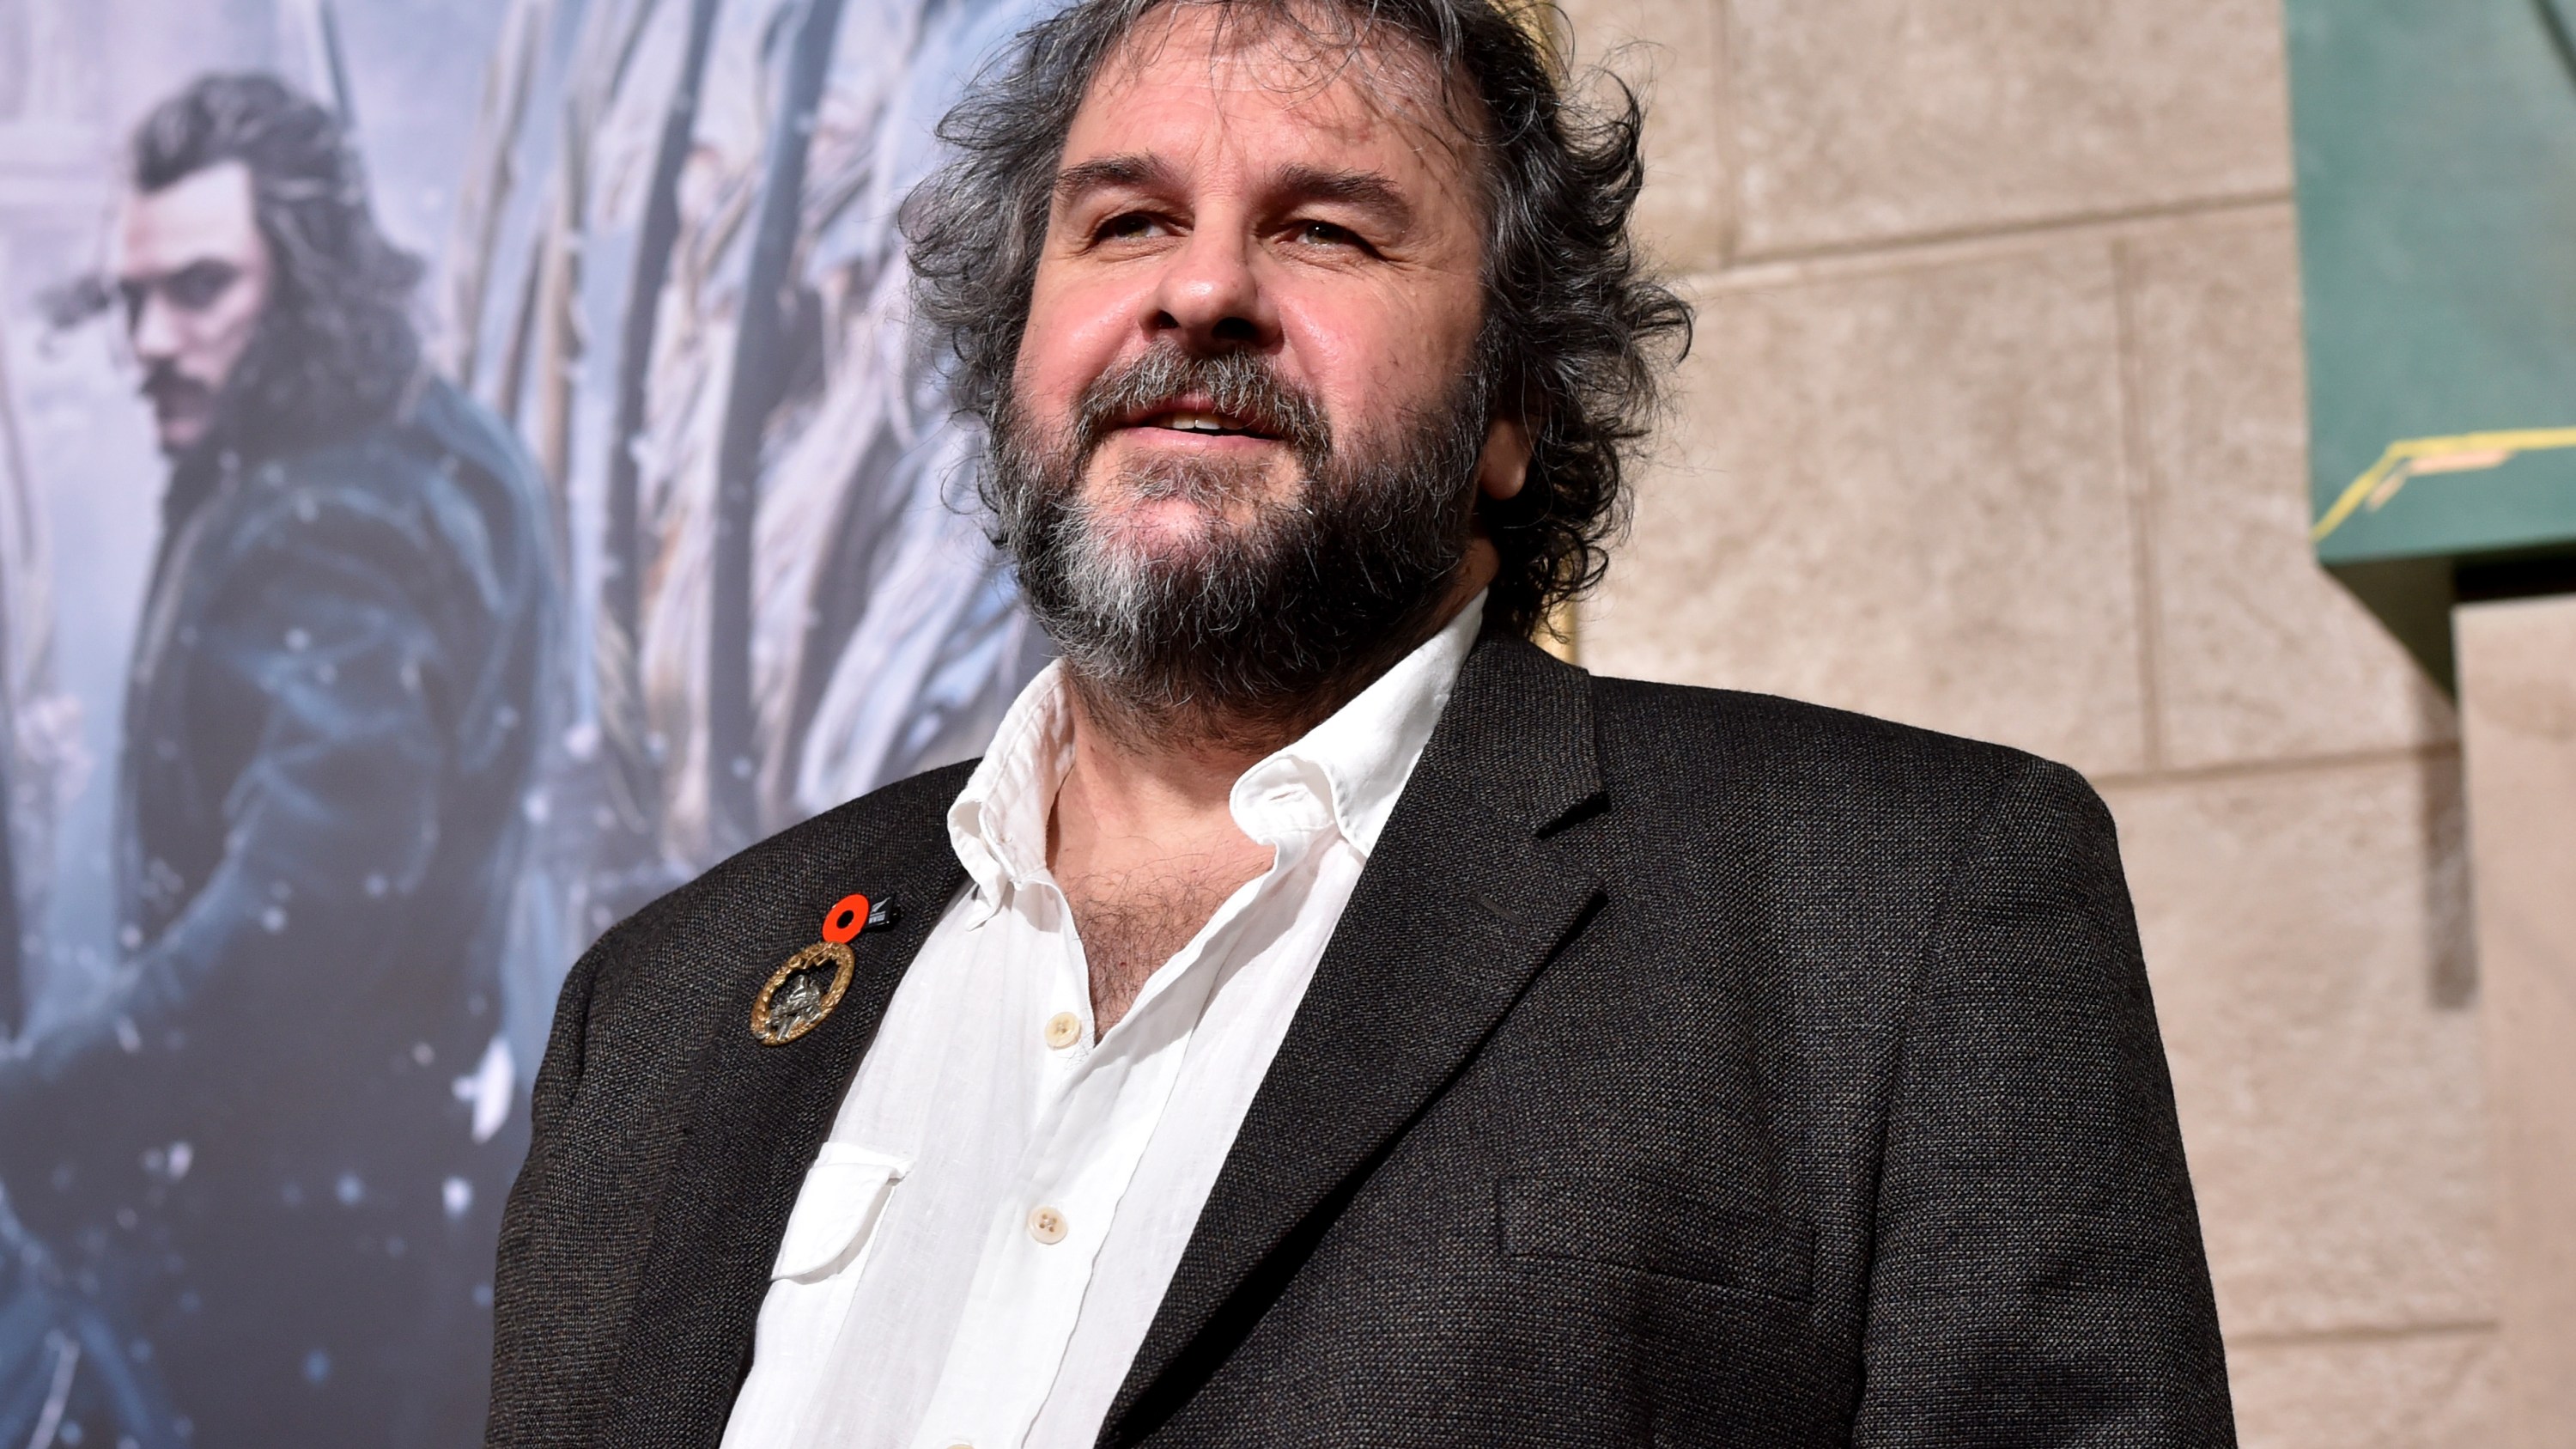 HOLLYWOOD, CA - DECEMBER 09:  Writer/director/producer Peter Jackson attends the premiere of New Line Cinema, MGM Pictures and Warner Bros. Pictures' "The Hobbit: The Battle of the Five Armies" at Dolby Theatre on December 9, 2014 in Hollywood, California.  (Photo by Kevin Winter/Getty Images)